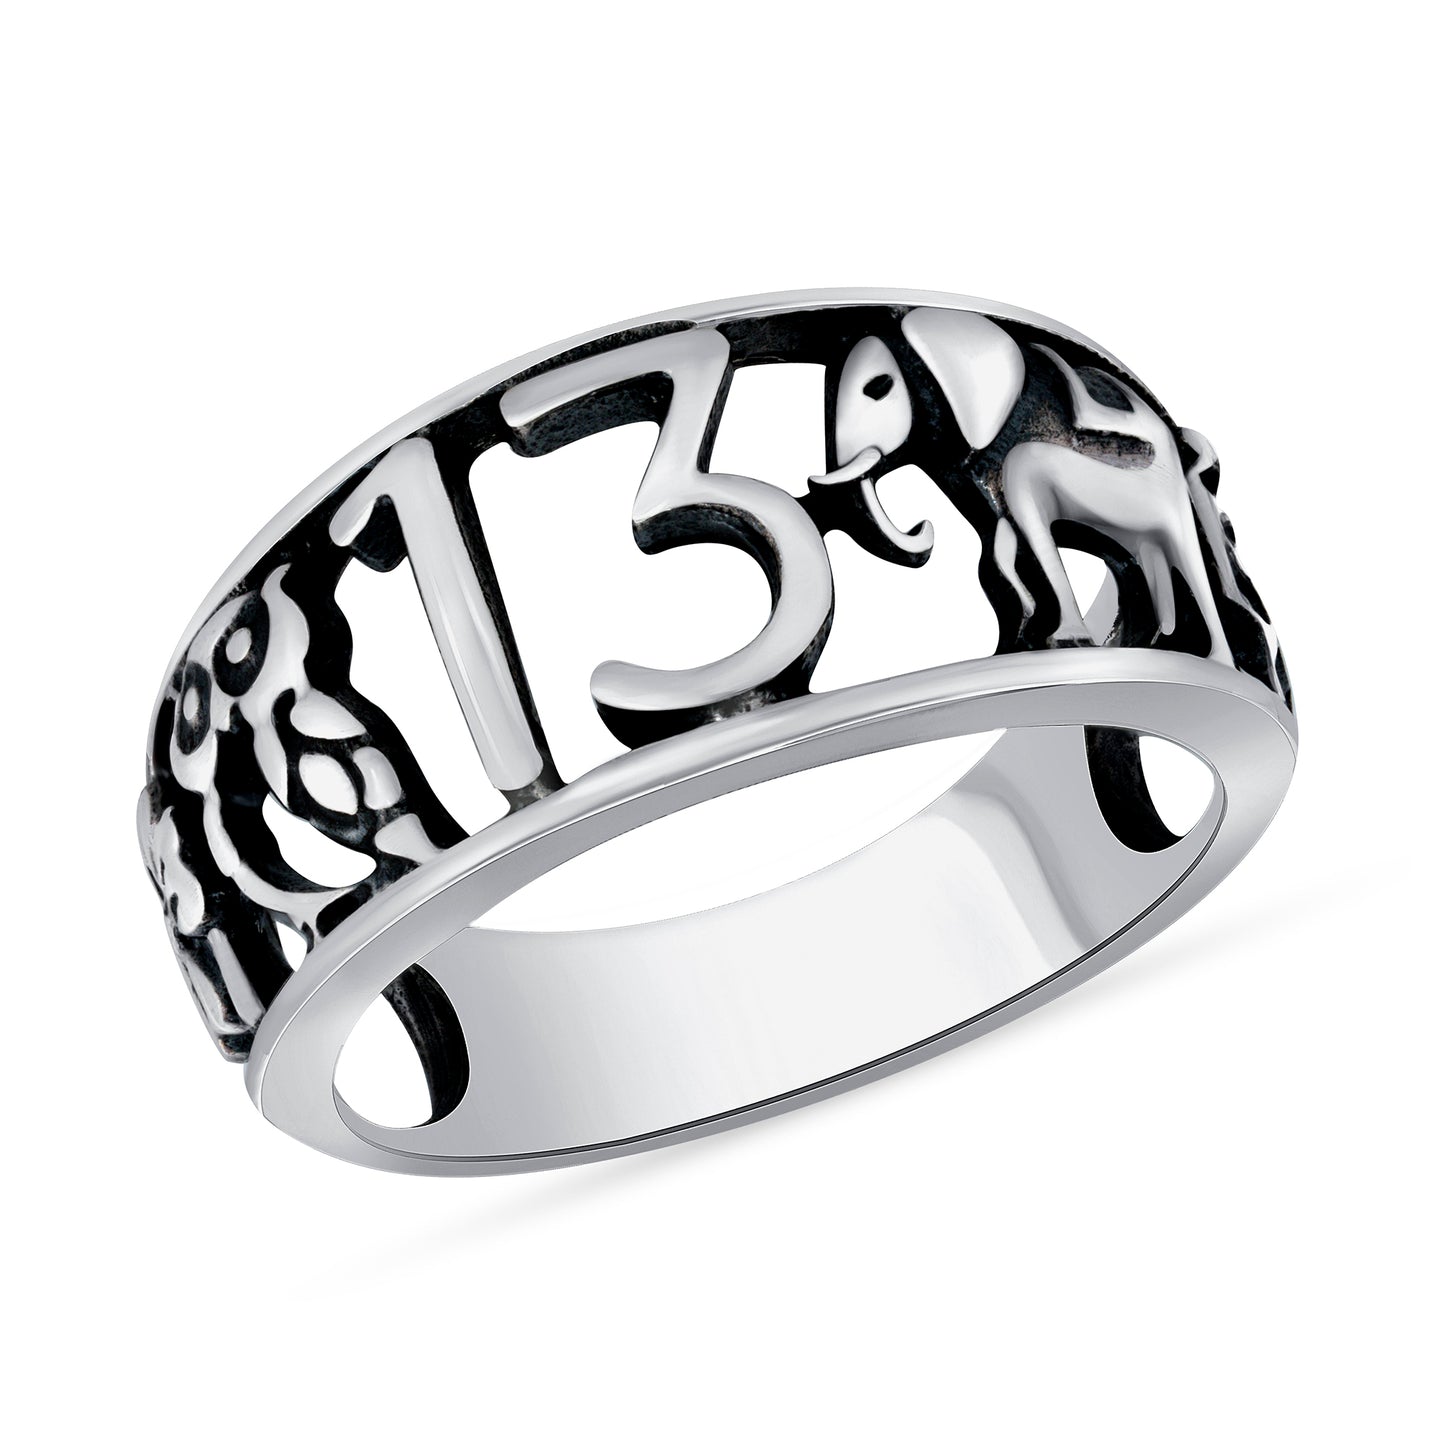 Silver 925 Oxidized Women Lucky Ring. R68010980